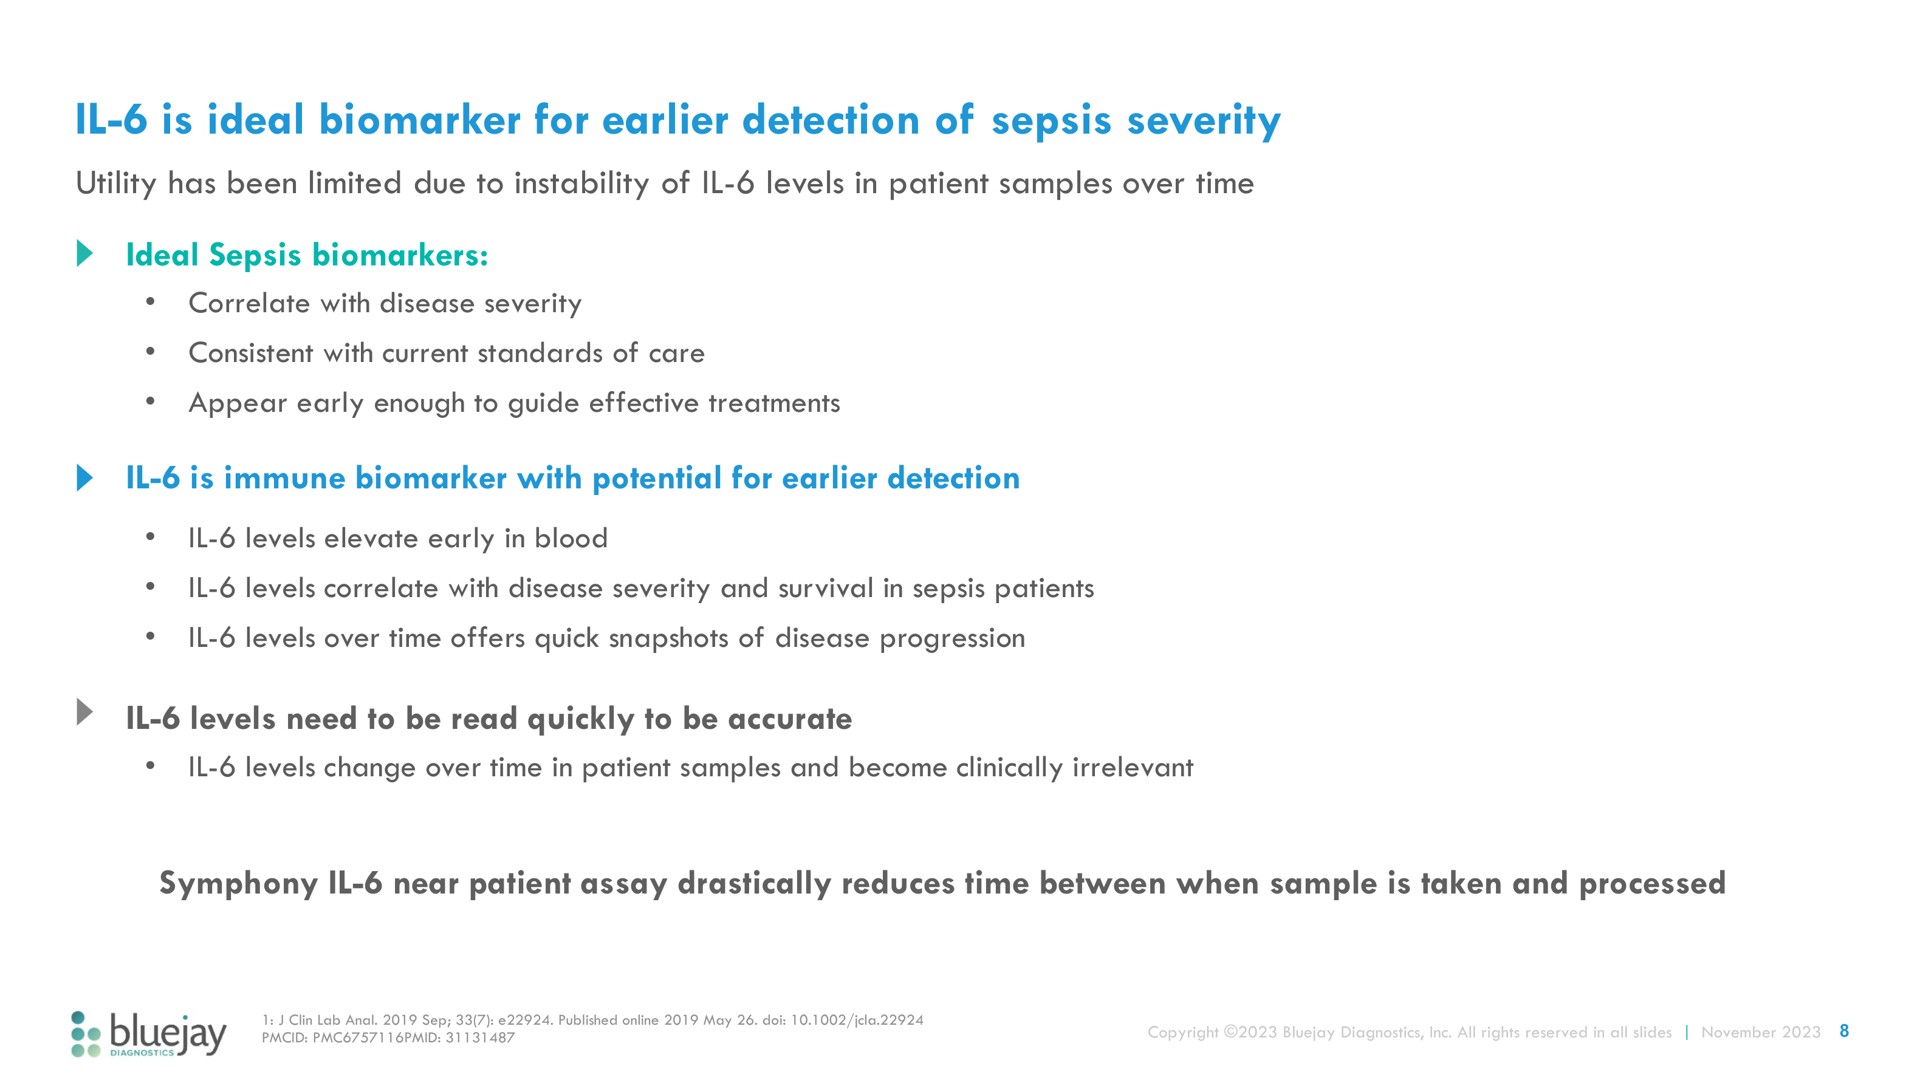 is ideal for detection of sepsis severity | Bluejay